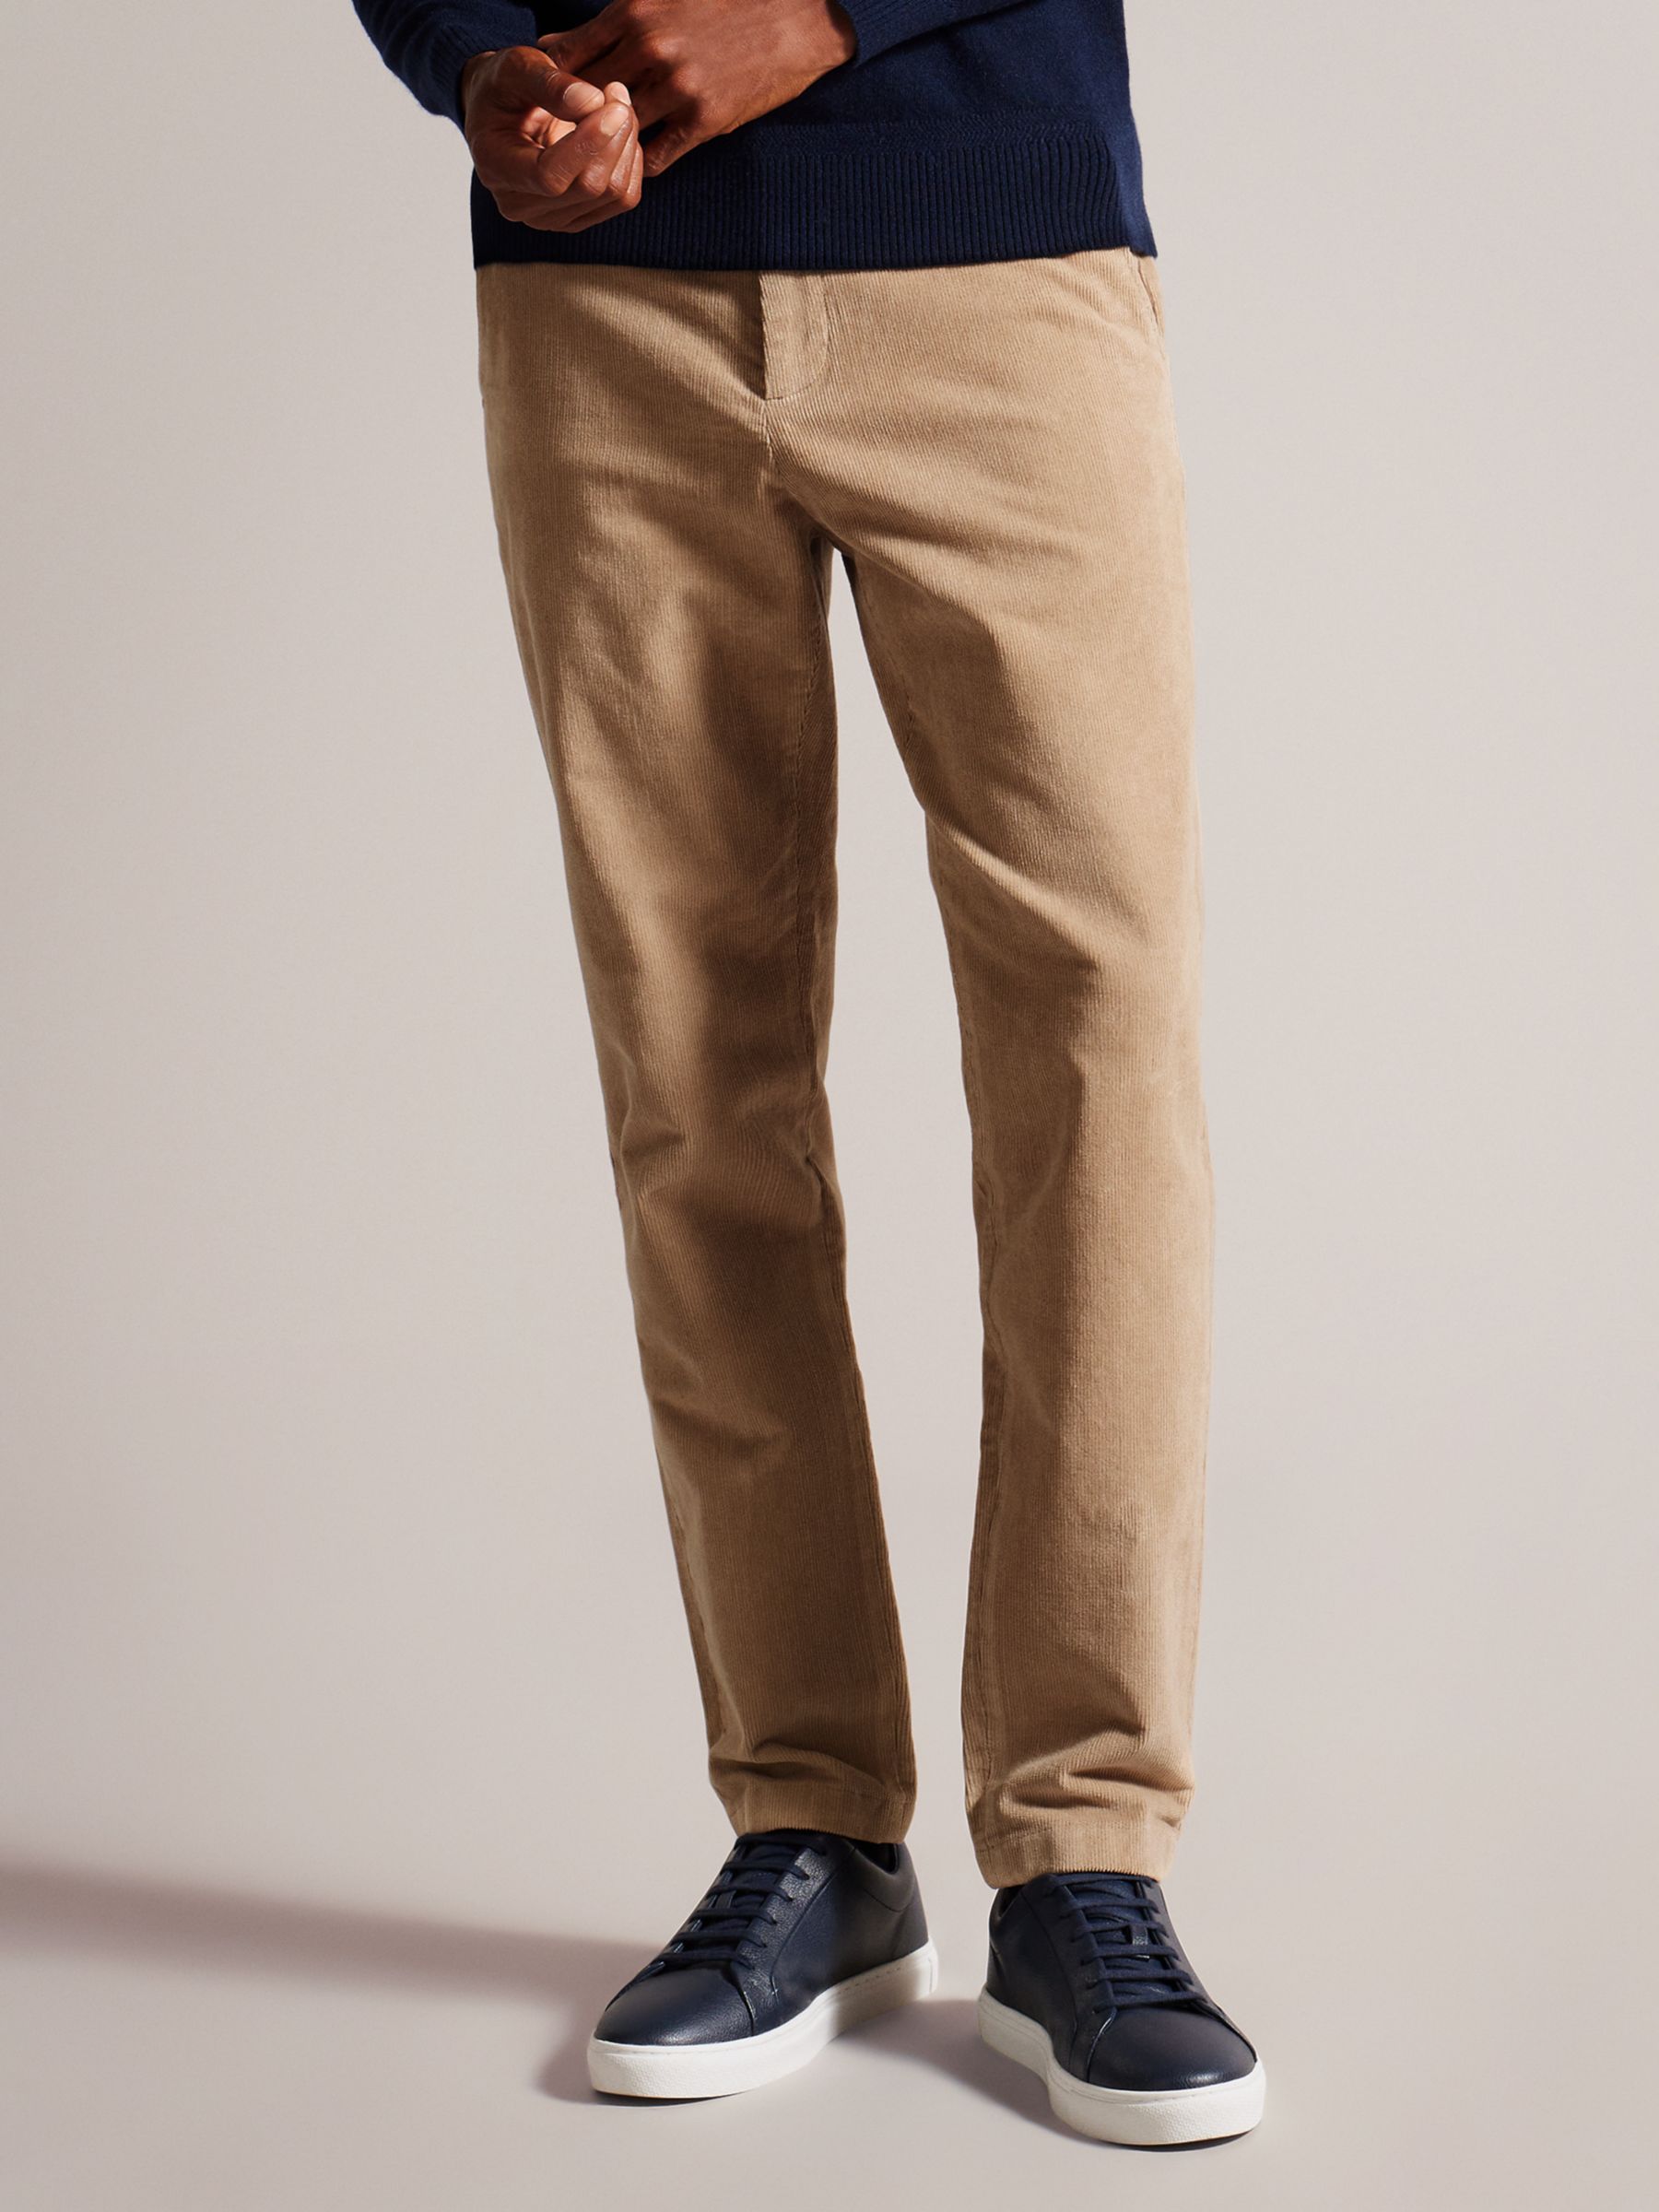 Superdry Washed Straight Leg Joggers, Oatmeal at John Lewis & Partners